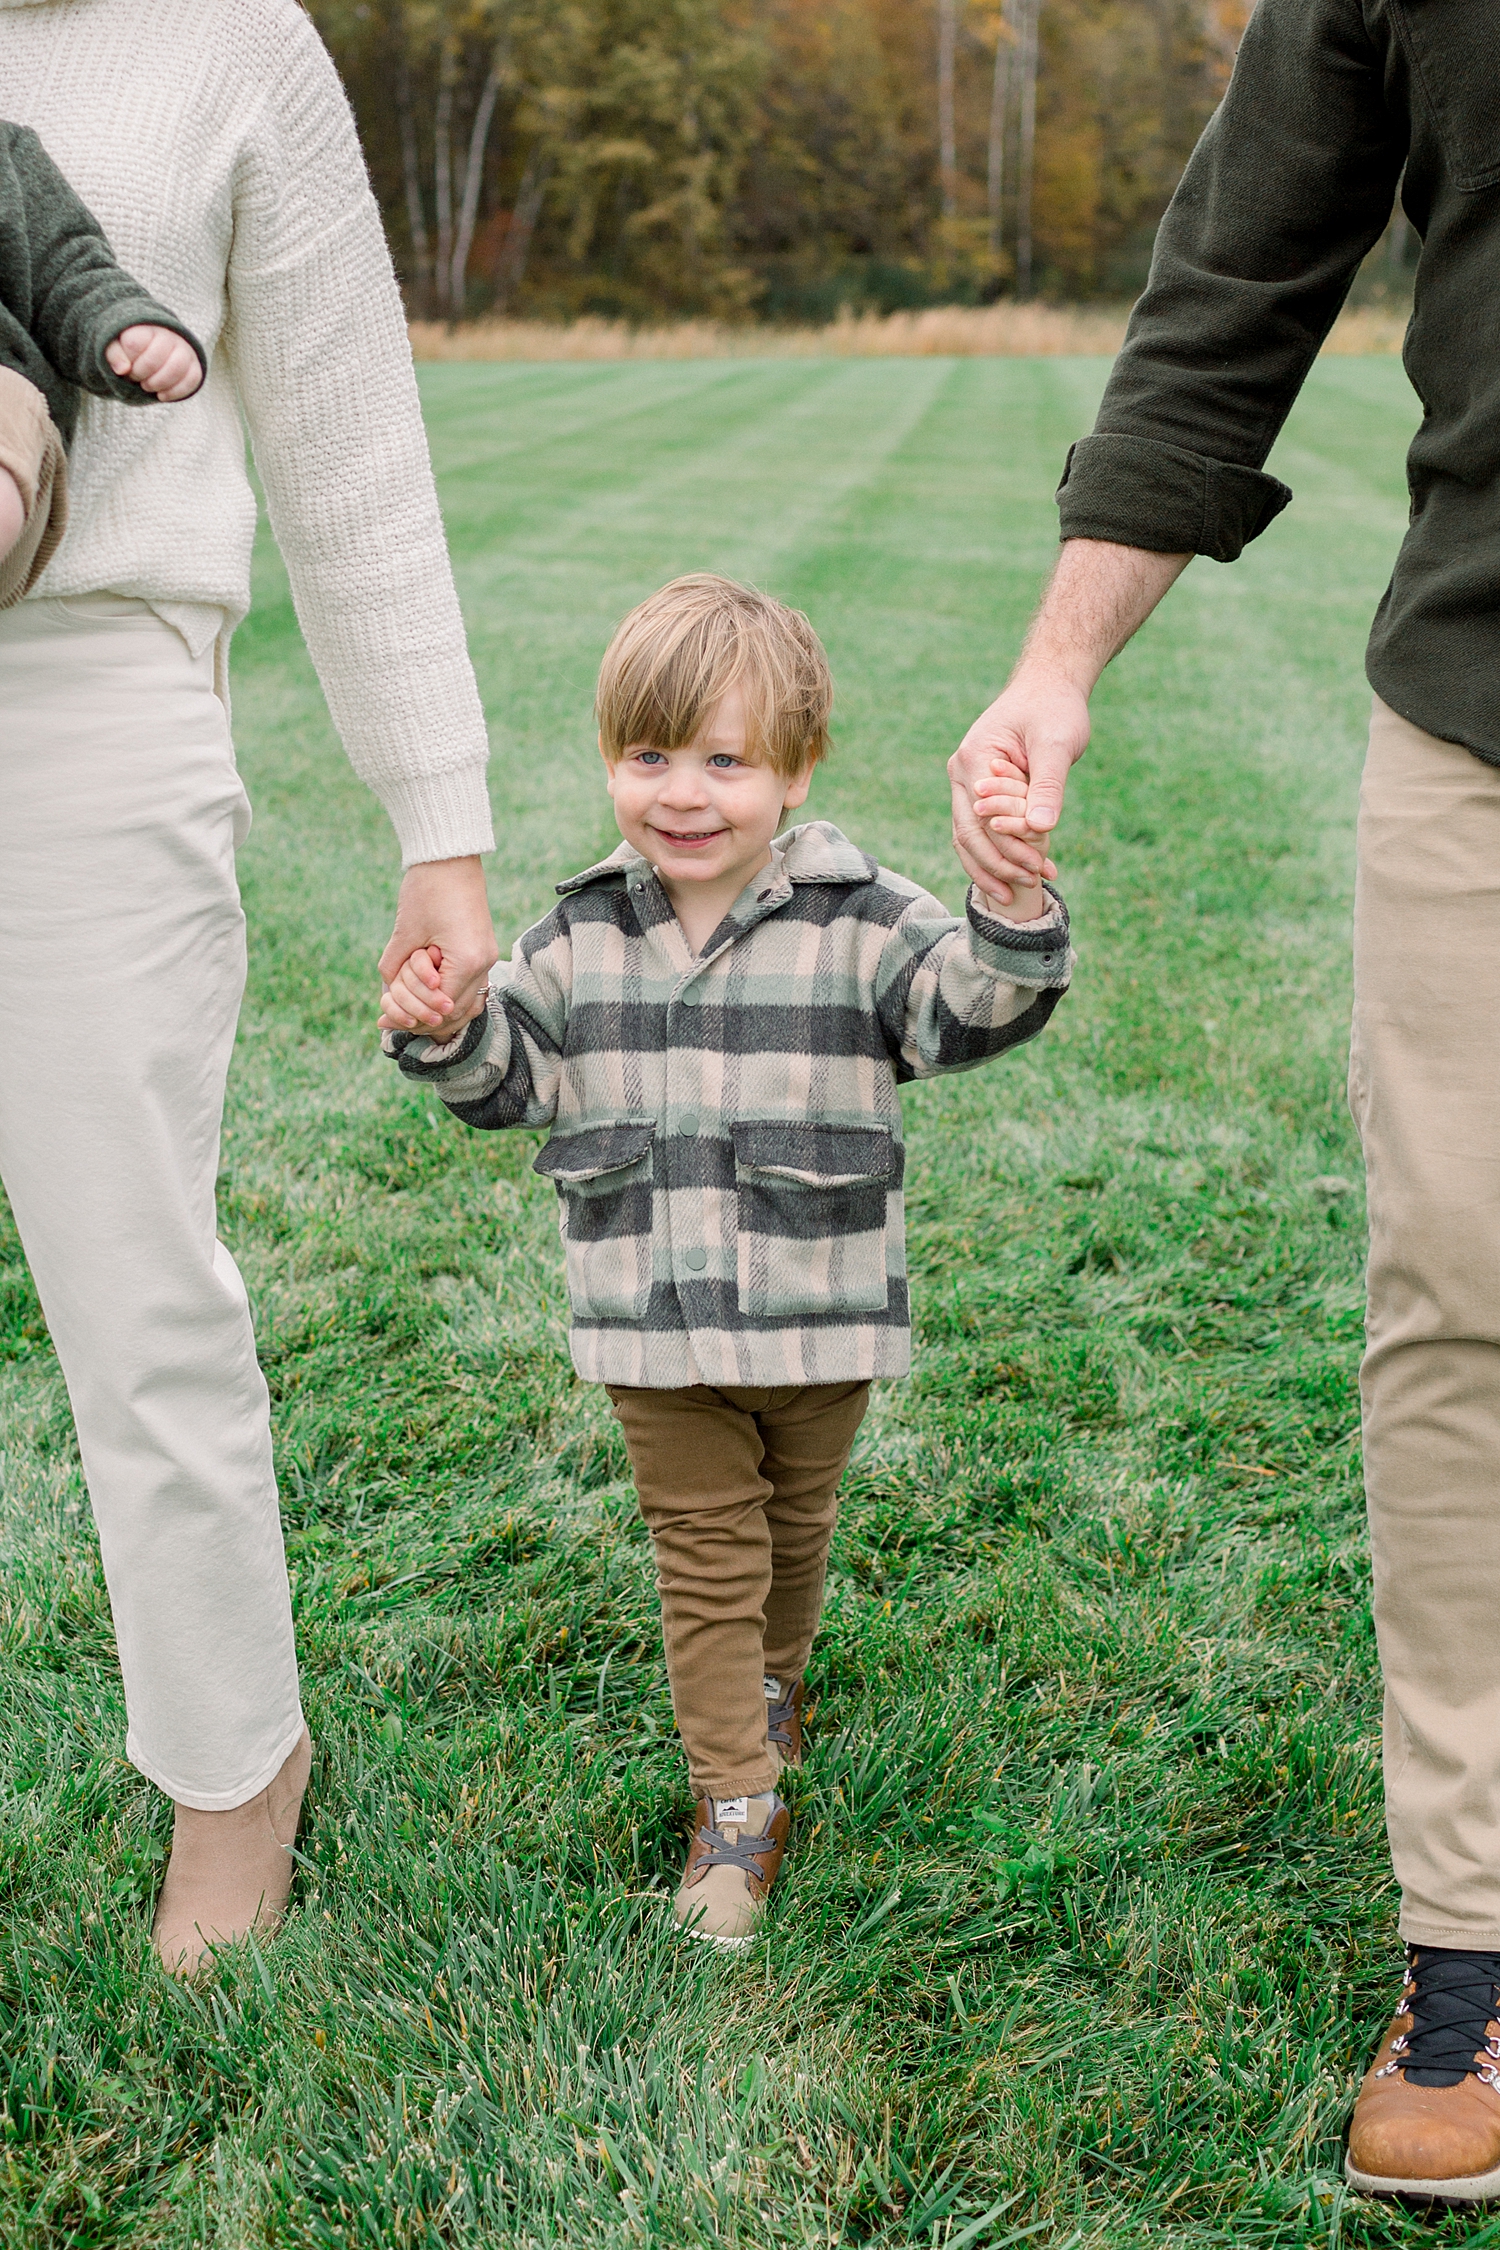 Family Session at Pittsfield Park